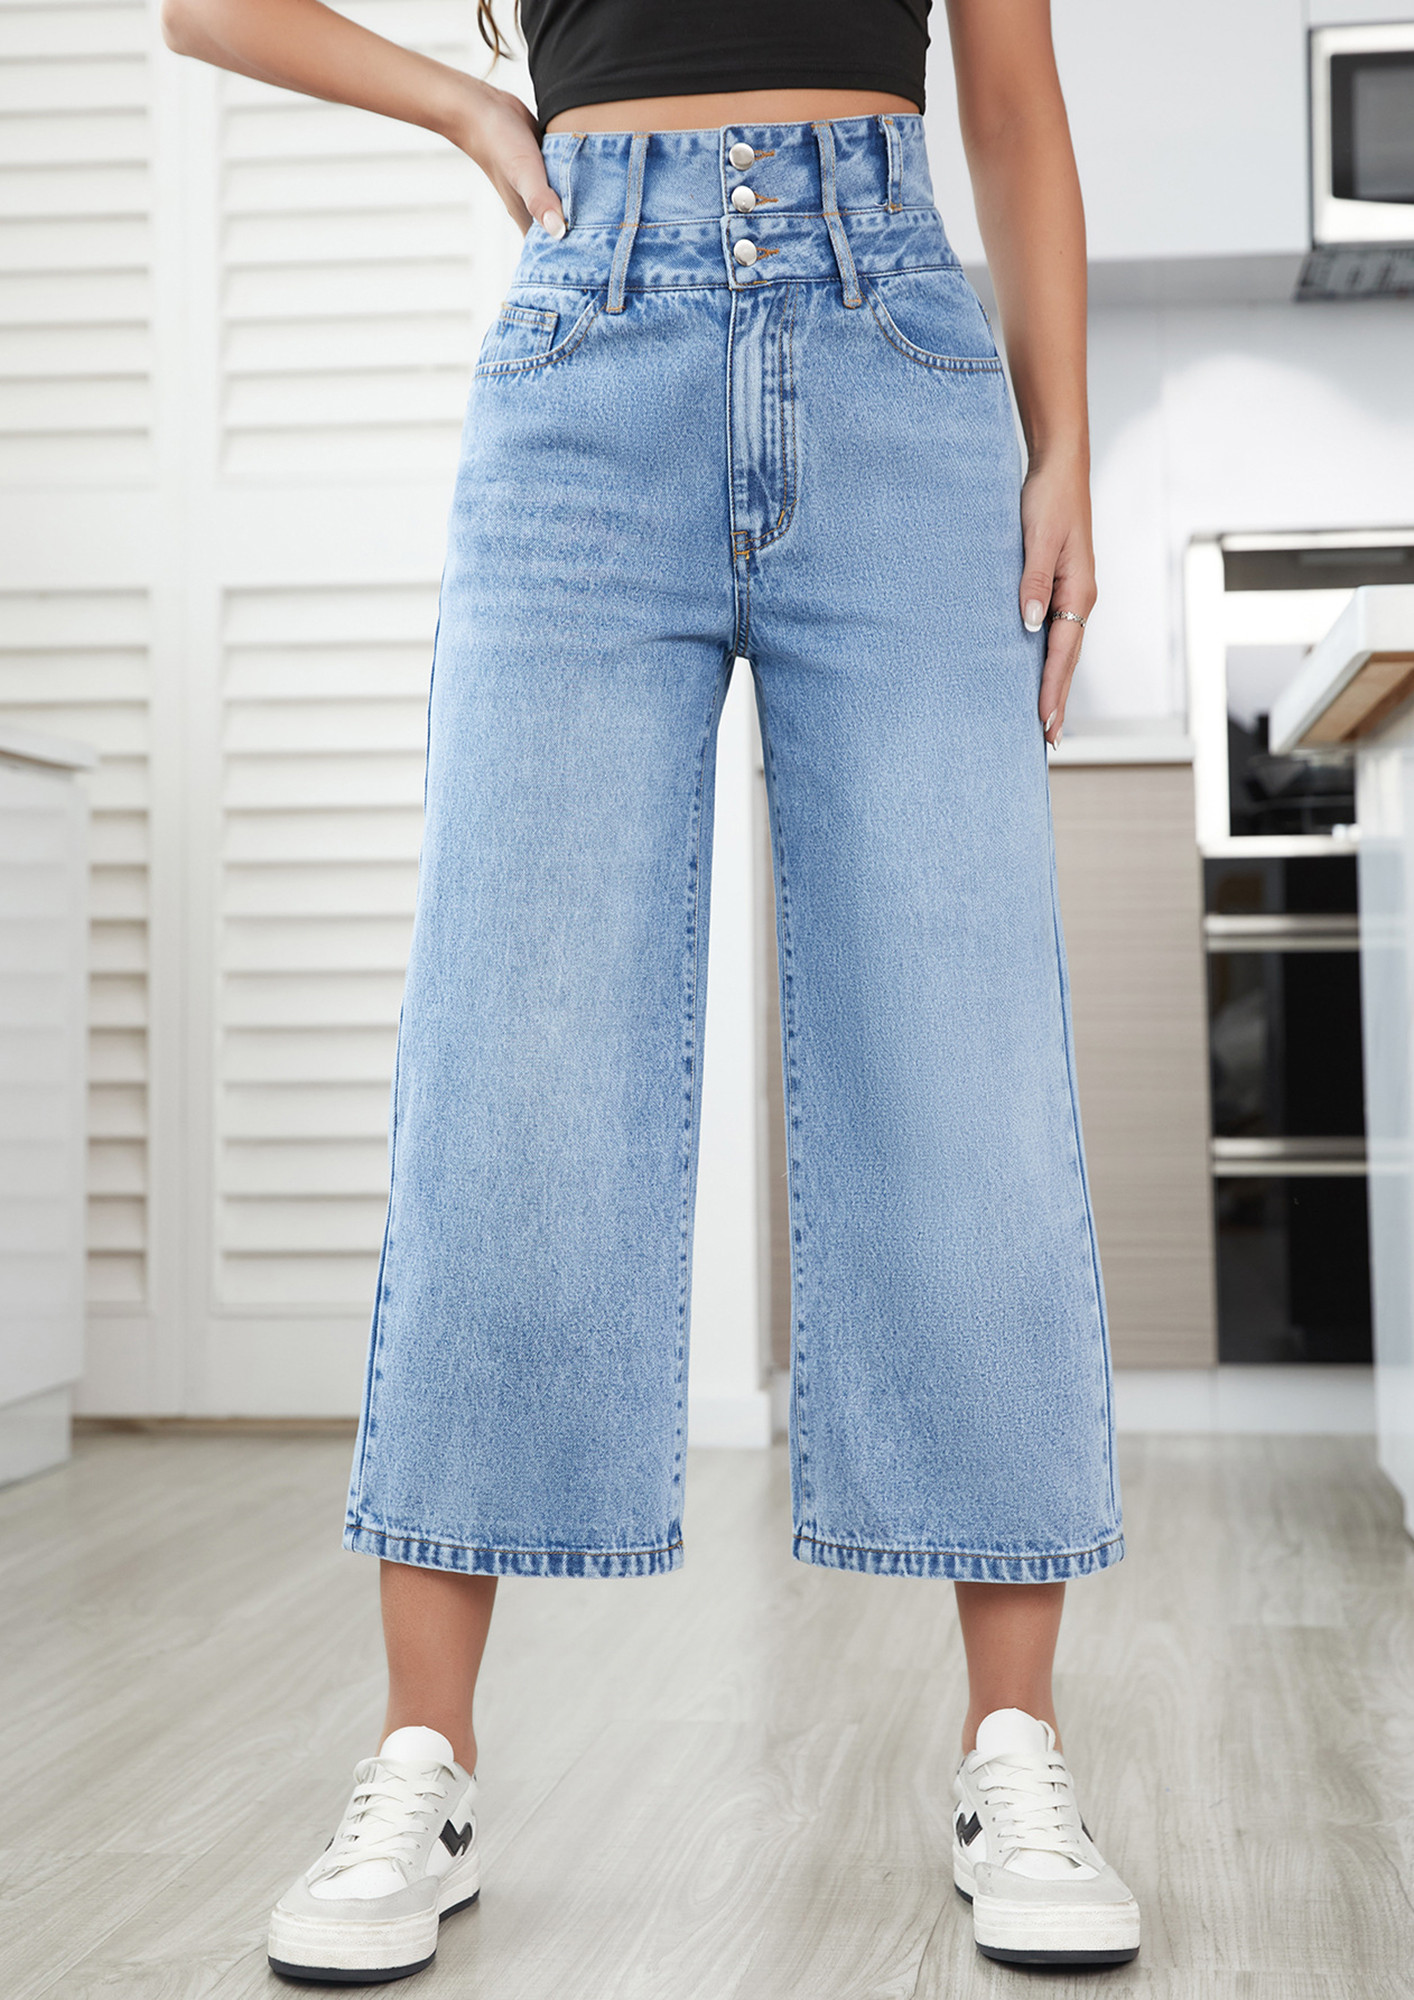 3 Easy Ways to Wear Denim Culottes - wikiHow Life